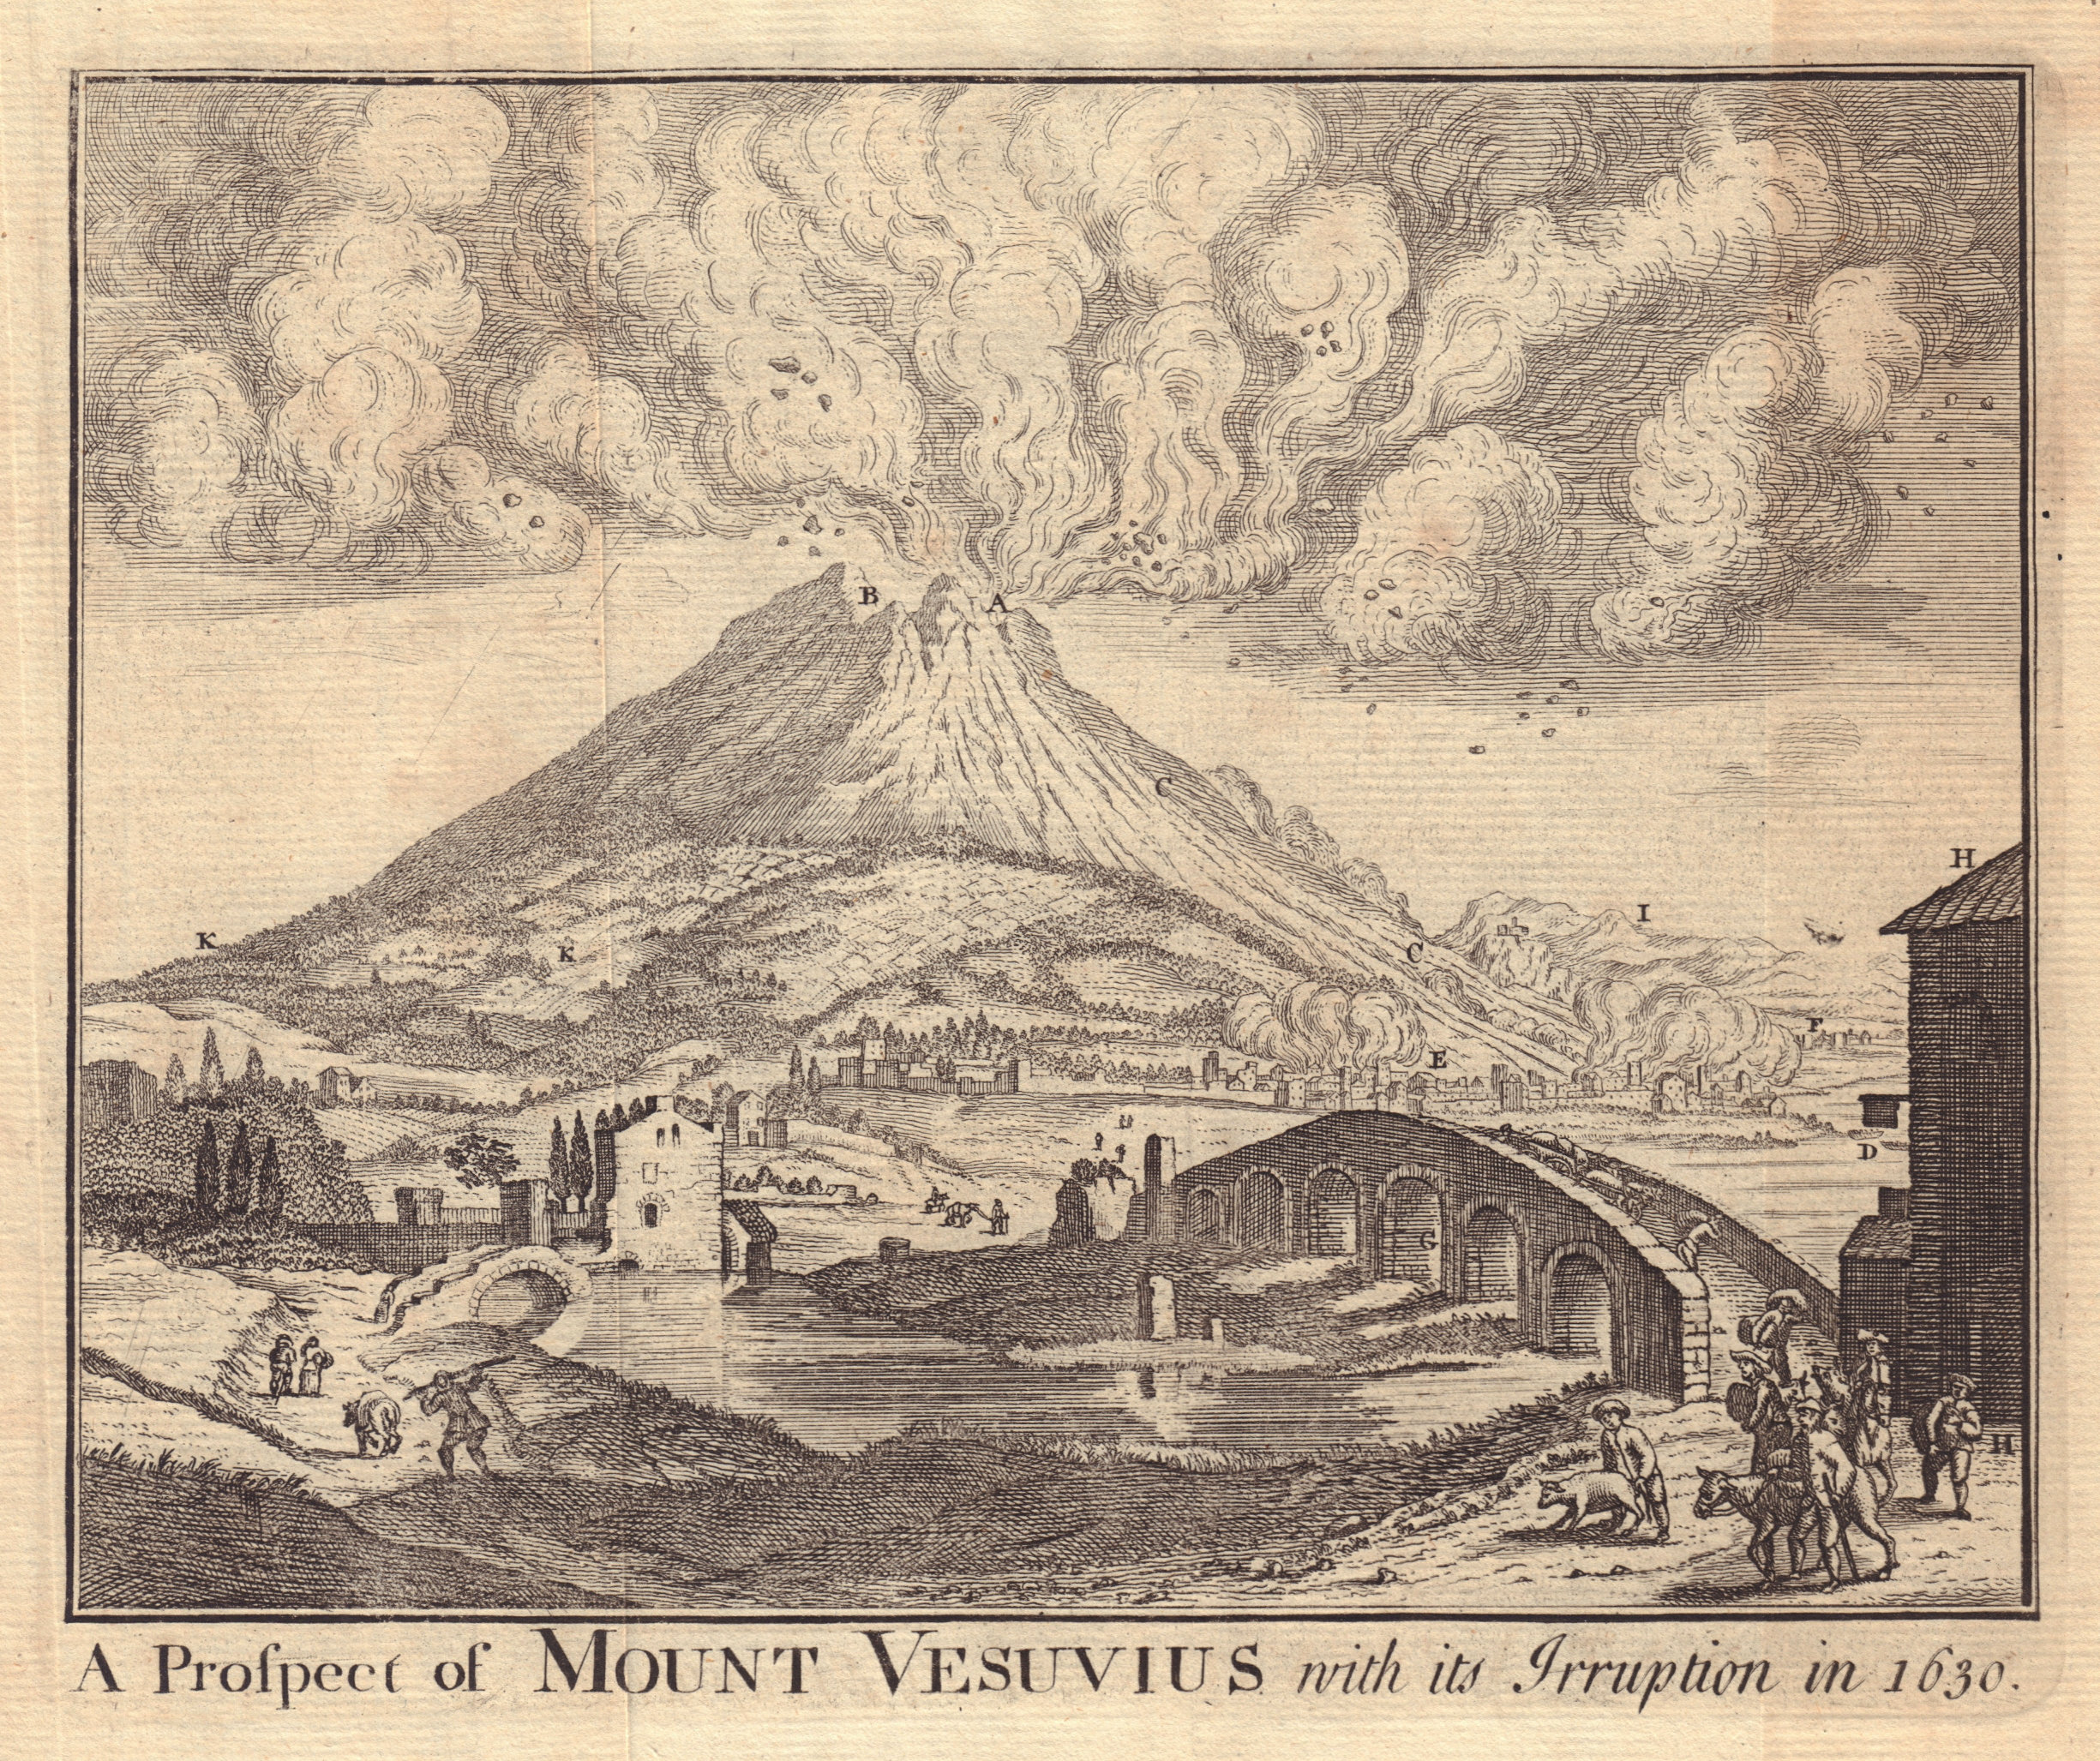 Associate Product Prospect of Mount Vesuvius with its Irruption in 1630. Eruption 1750 old print